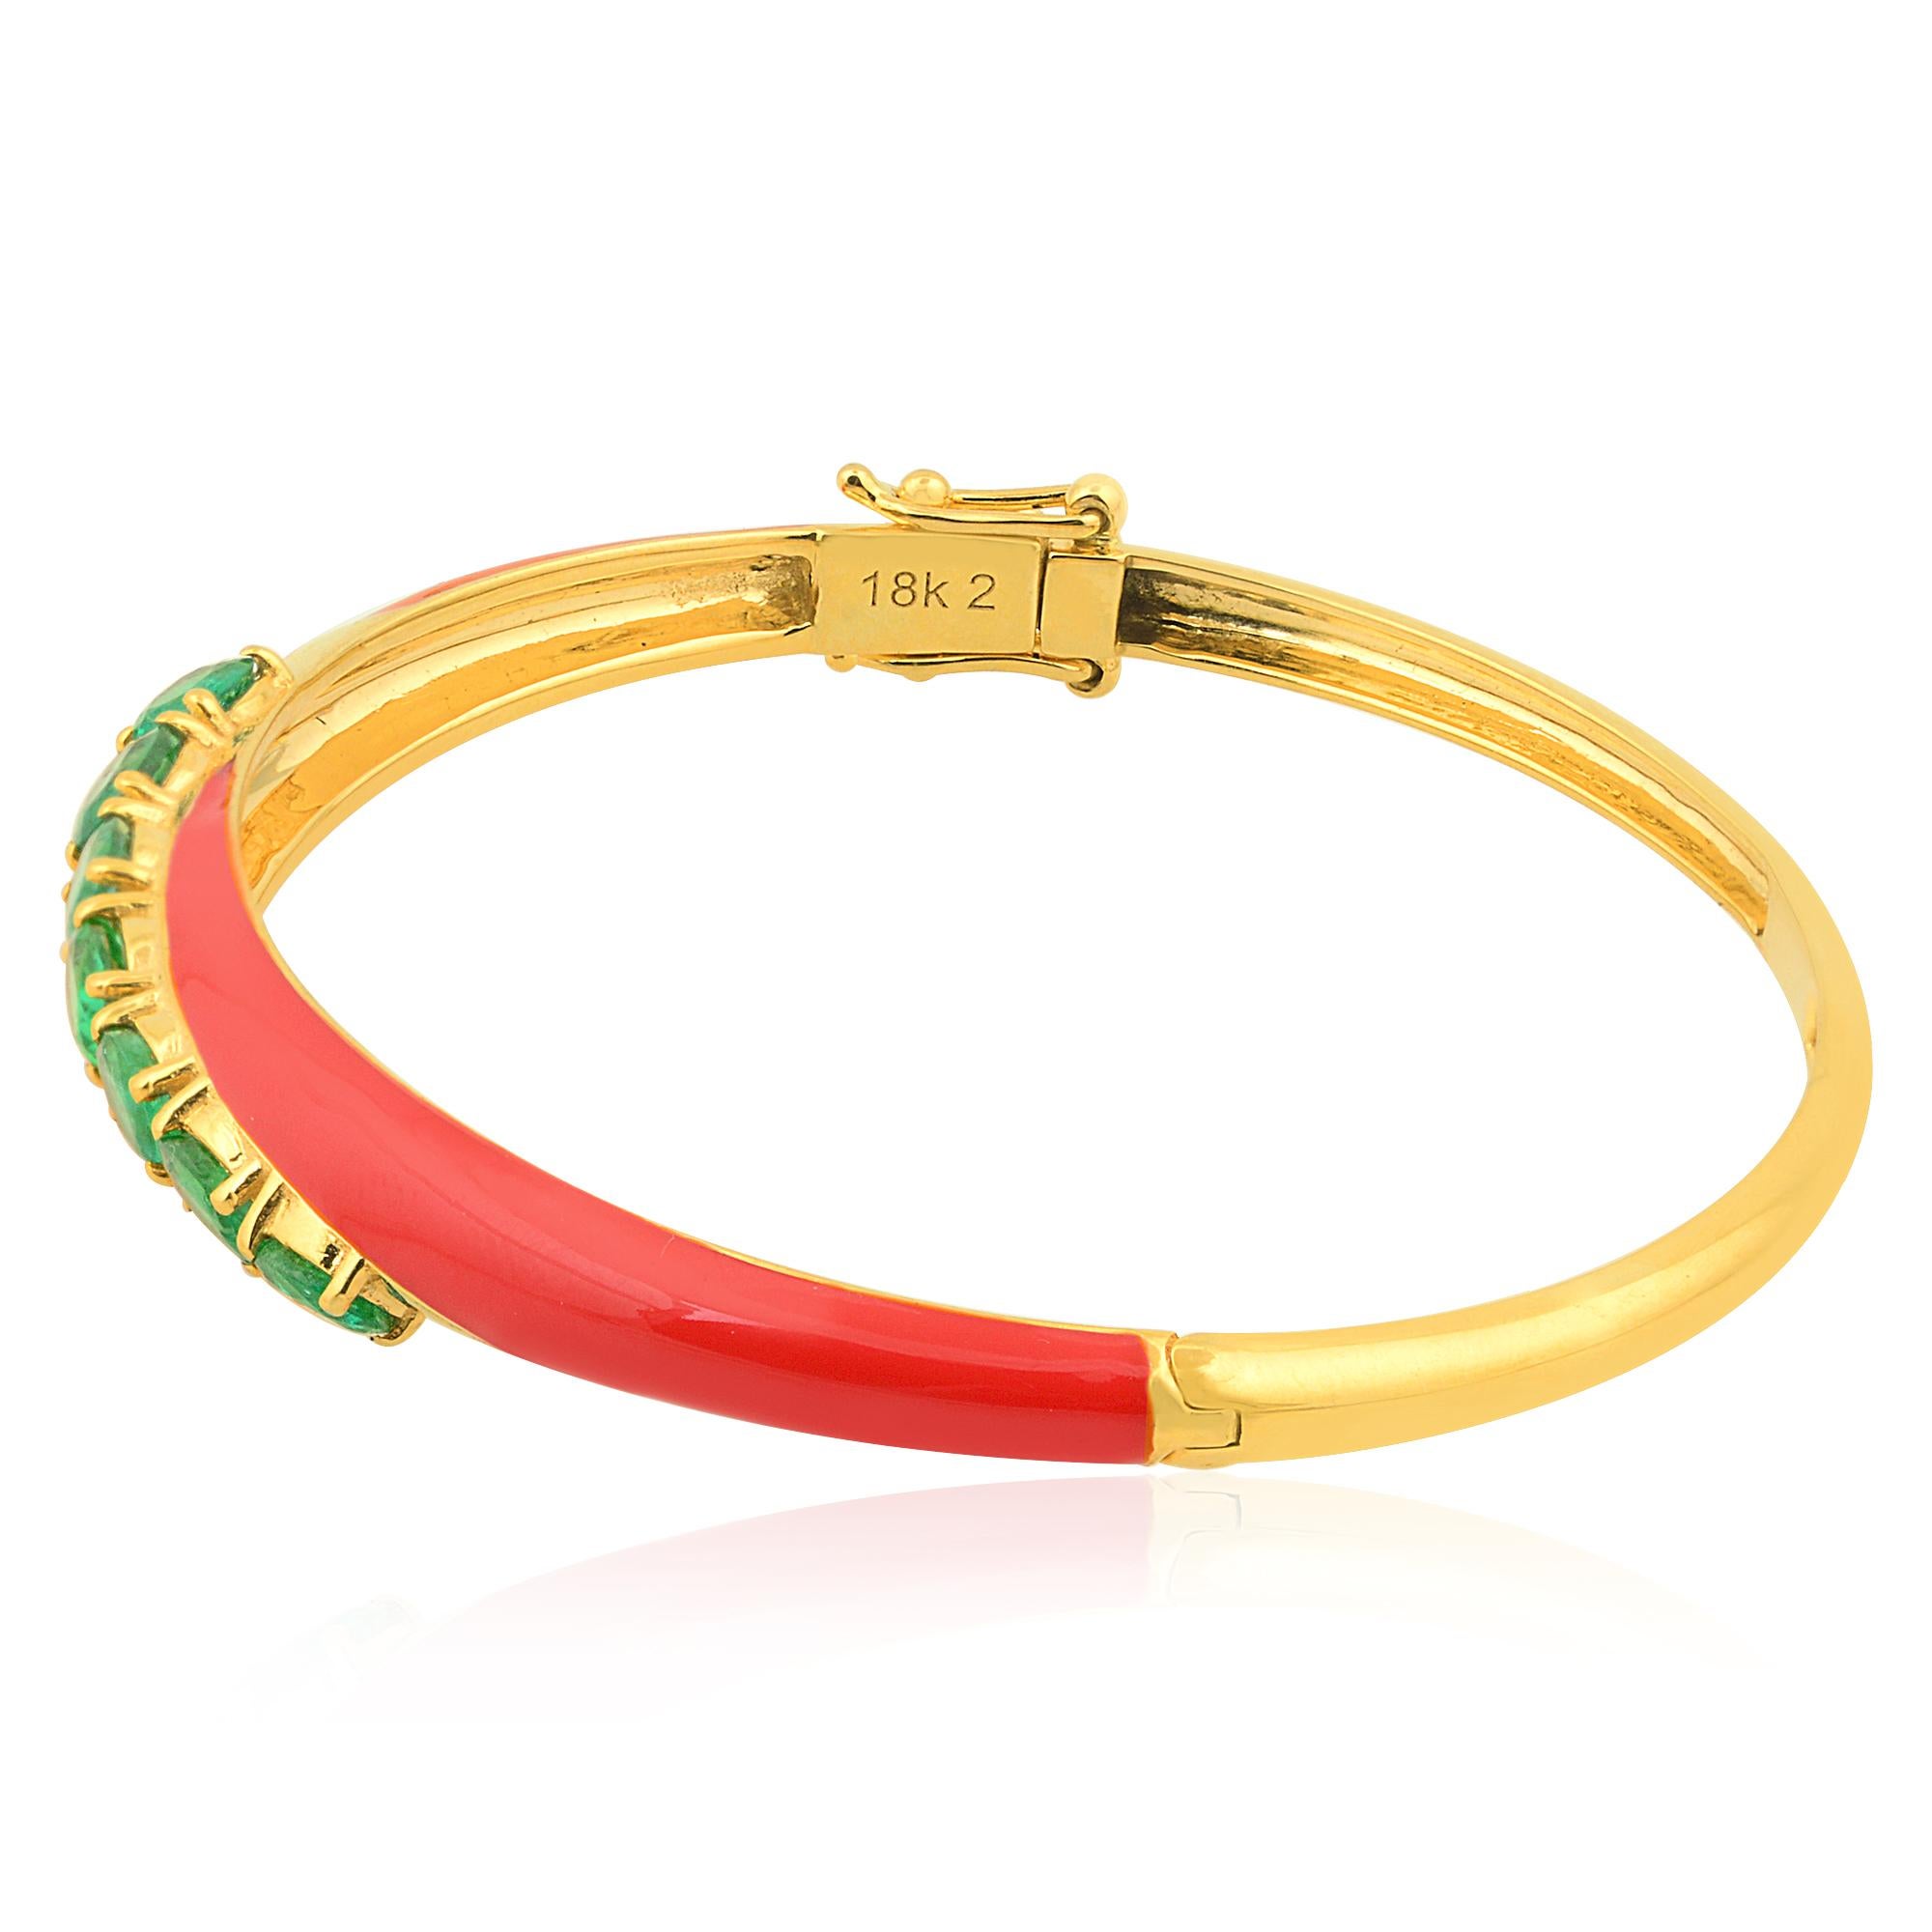 Item Code :- SEB-6177 (14k)
Gross Weight :- 9.86 gm
14k Yellow Gold Weight :- 9.41 gm
Emerald Weight :- 2.27 carat 
Bangle Size :- 60x40 mm outer diameter
✦ Sizing
.....................
We can adjust most items to fit your sizing preferences. Most